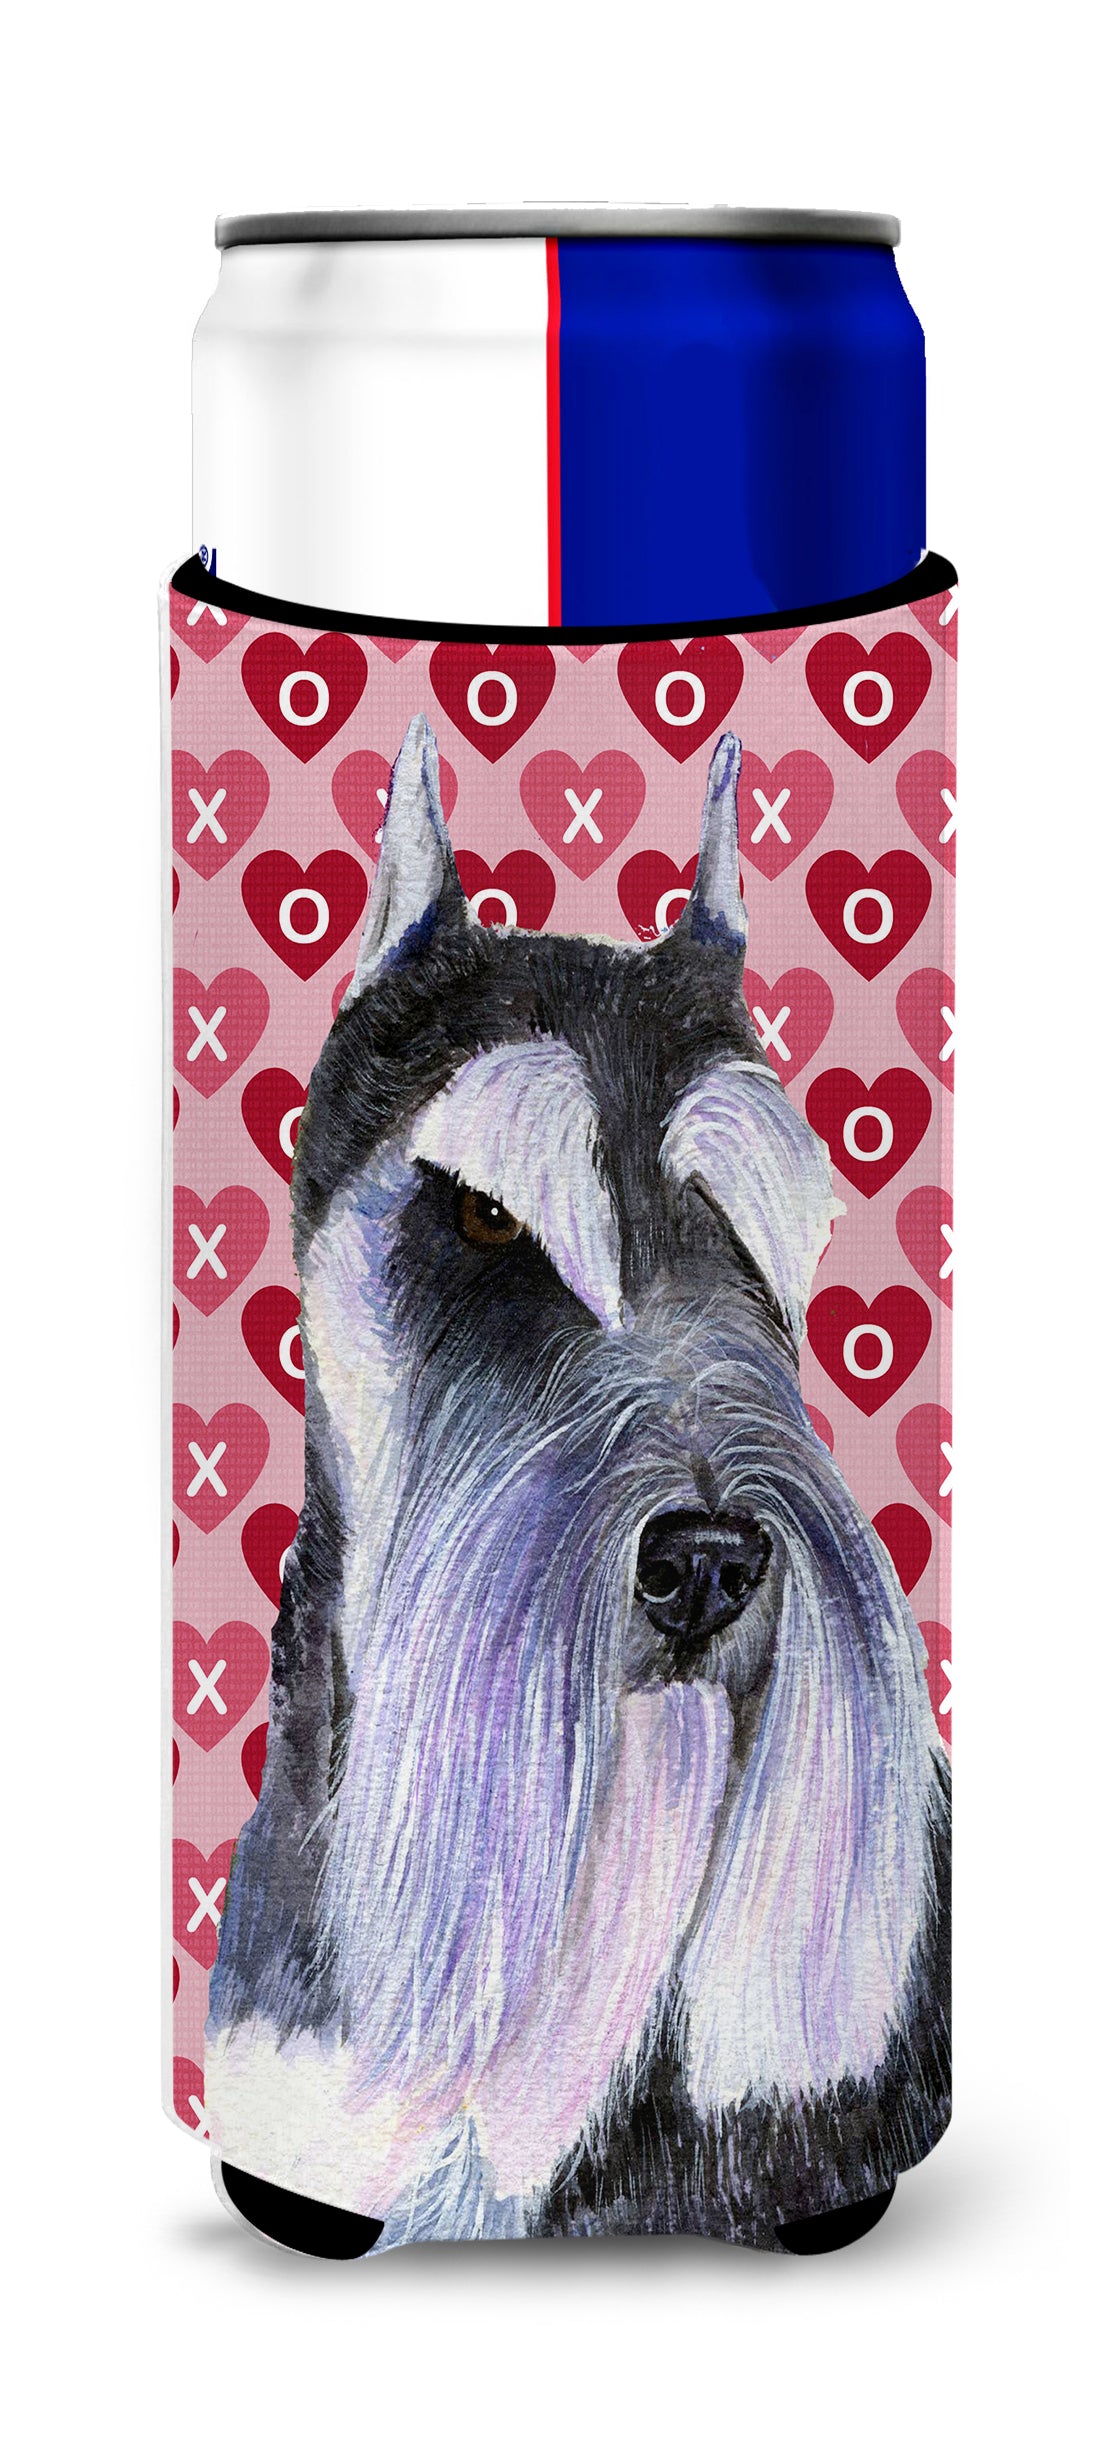 Schnauzer Hearts Love and Valentine's Day Portrait Ultra Beverage Insulators for slim cans SS4477MUK.